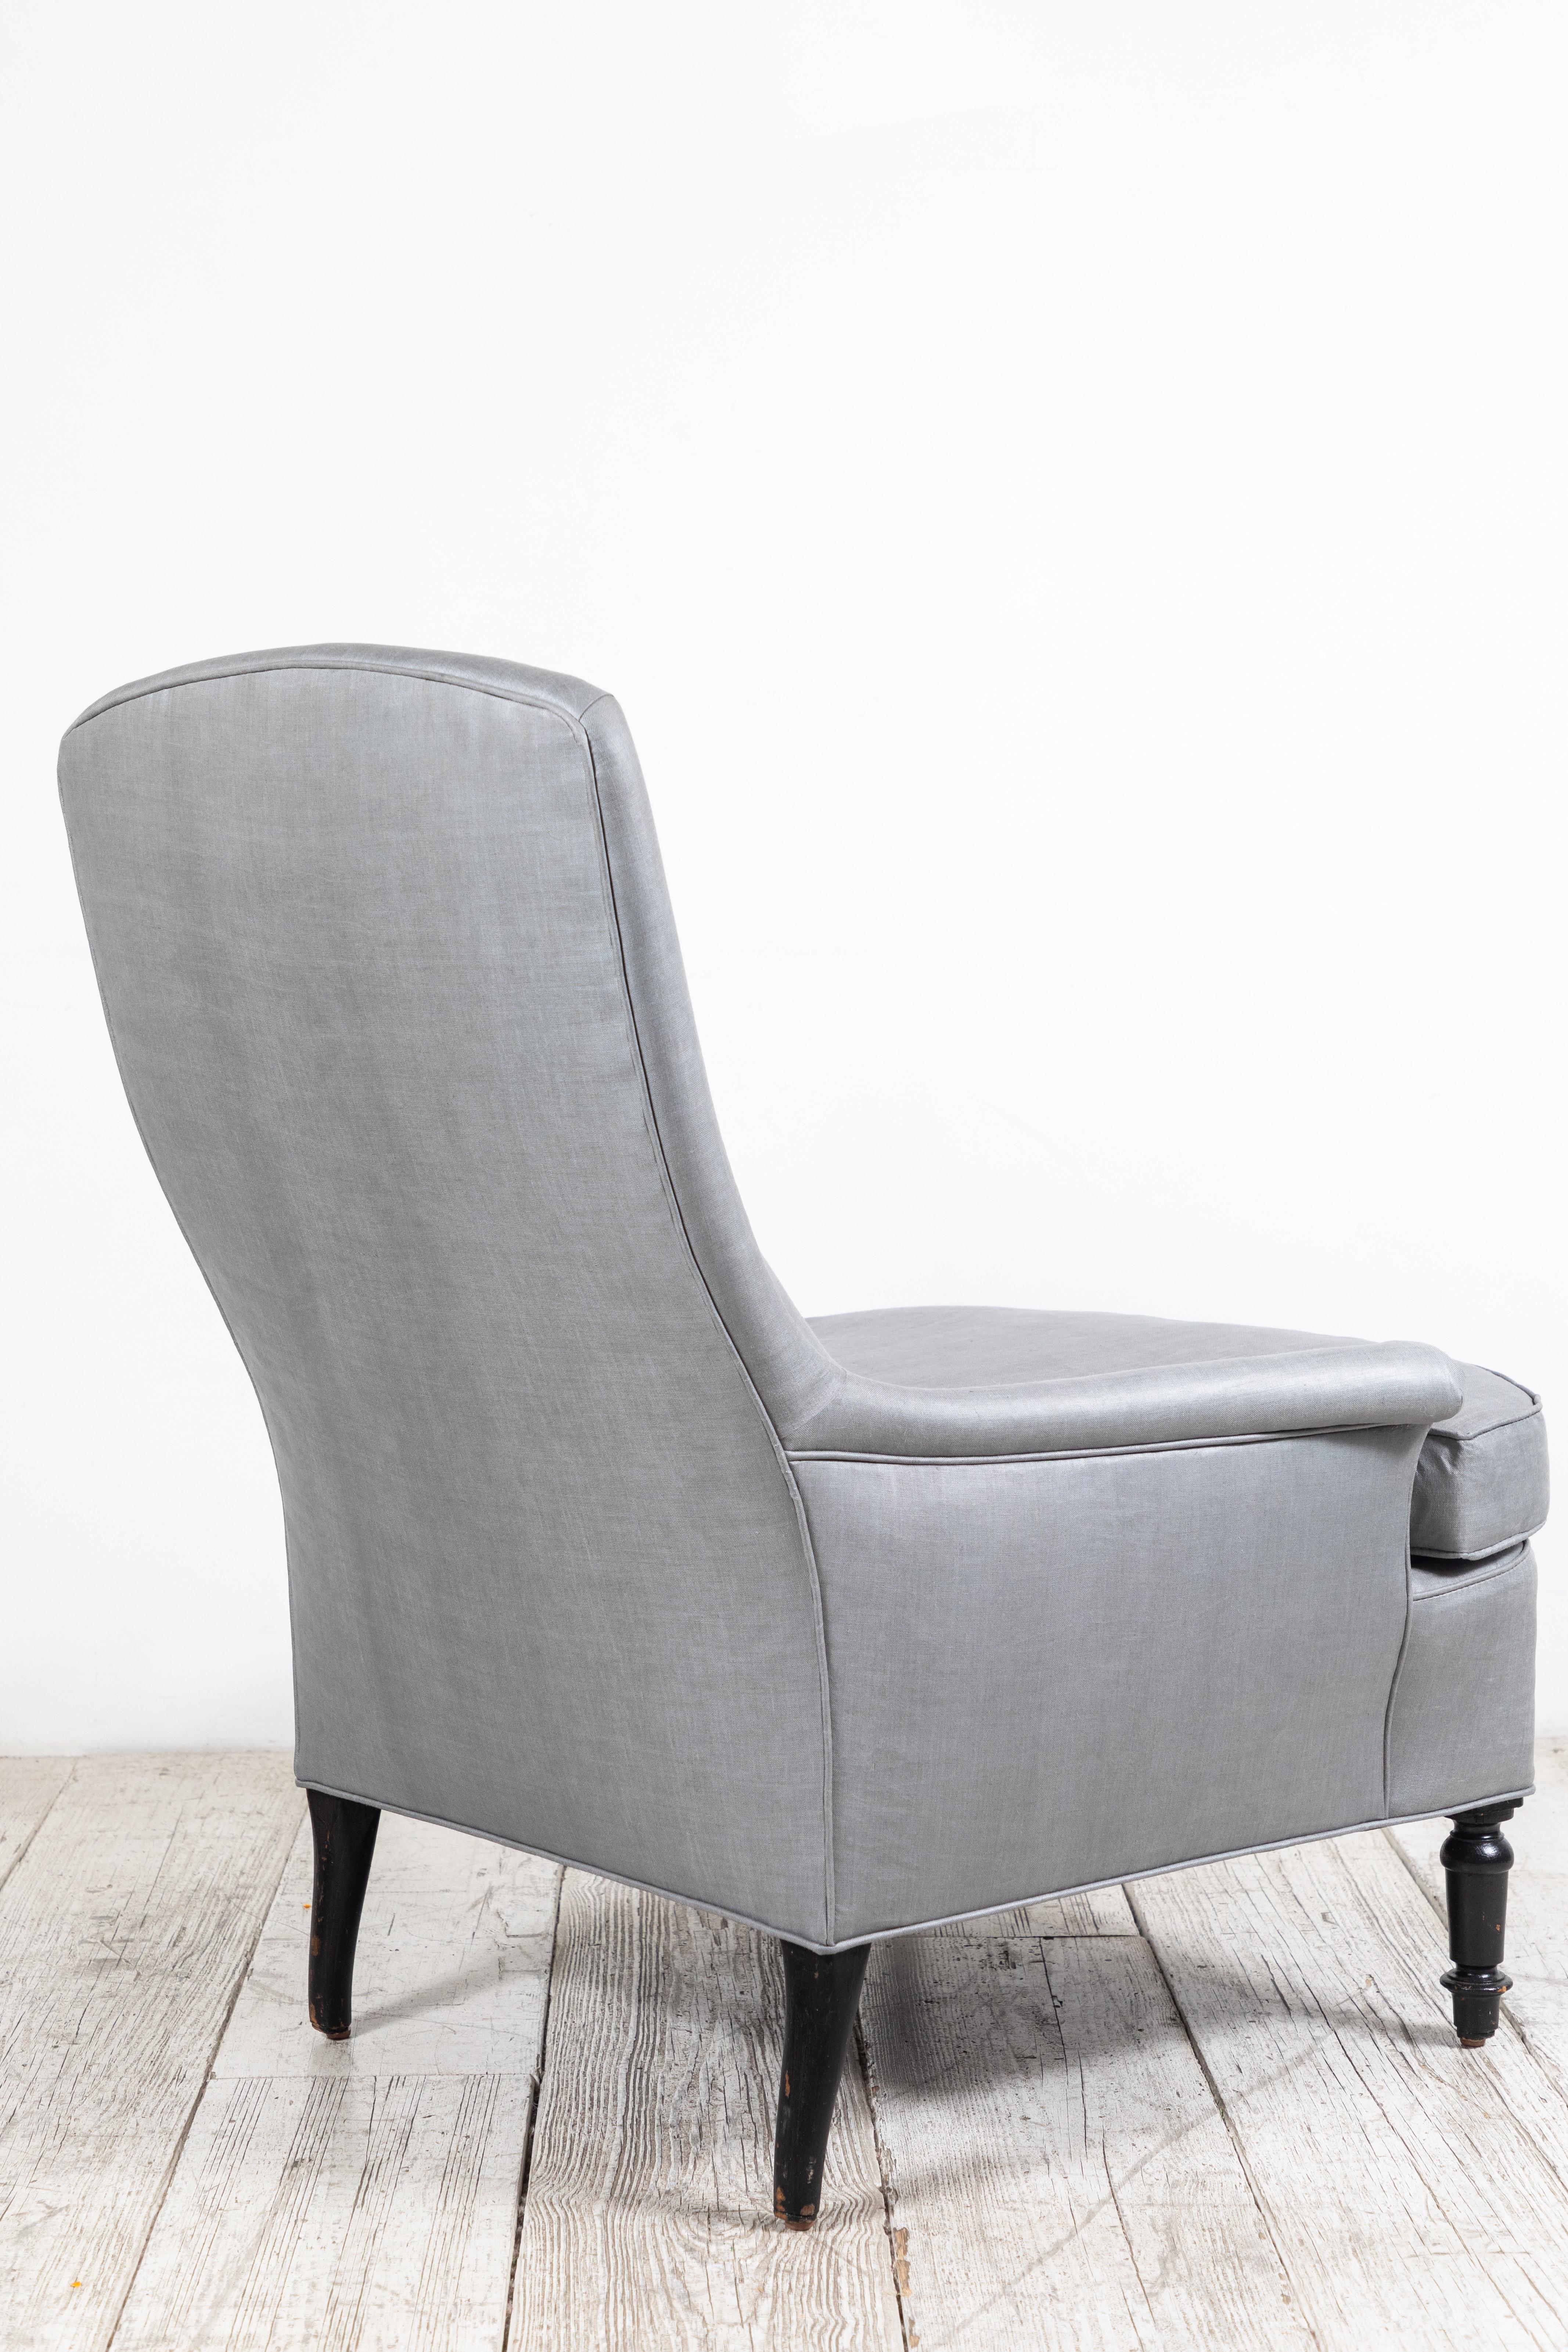 Pair of French Club Chairs Upholstered in Grey Beetled Linen Fabric 5